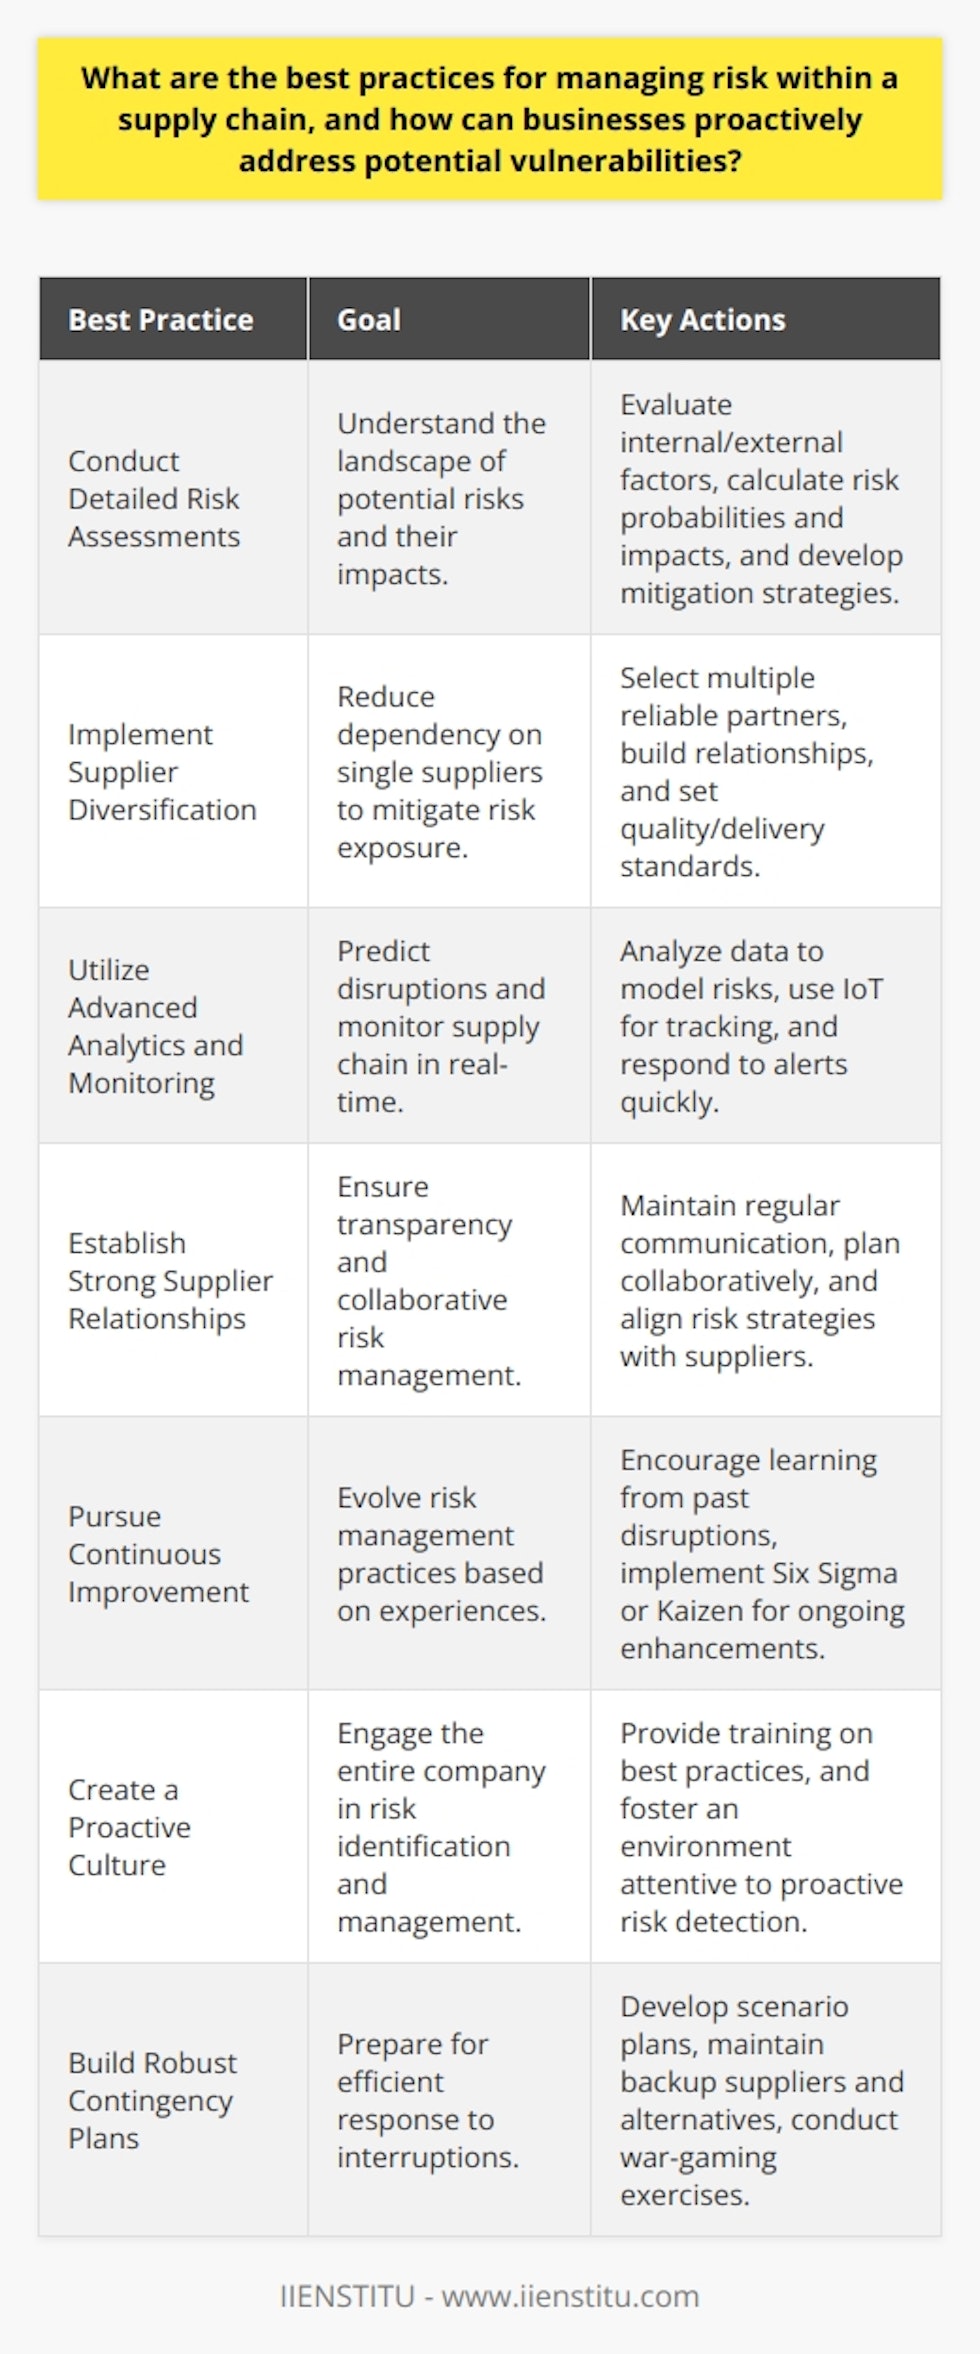 Managing risk within a supply chain is critical for maintaining a resilient and effective business operation. The following are best practices for risk management that businesses can adopt to identify and mitigate risks and proactively address potential vulnerabilities:**Conduct Detailed Risk Assessments**Performing routine and thorough risk assessments is the cornerstone of supply chain risk management. These assessments should look at internal processes and external factors, such as geopolitical events, environmental changes, legal and regulatory shifts, market volatility, and technological advancements. Effective risk assessments evaluate the probability and impact of potential disruptions, laying the groundwork for formulating strong mitigation strategies.**Implement Supplier Diversification**Dependence on a single supplier or a small group of suppliers increases vulnerability. A diversified supplier base can reduce this risk significantly, as the adverse effects of an issue with one supplier can be mitigated by swiftly switching to alternatives. Supplier diversification requires careful selection and relationship building with multiple partners to ensure they can meet quality and delivery standards.**Utilize Advanced Analytics and Monitoring**Leveraging advanced analytics can predict potential supply chain disruptions before they occur. By analyzing large sets of data related to supply chain performance, companies can develop predictive models that flag risks early. Furthermore, using IoT and real-time tracking systems for shipments and inventory can provide immediate updates, facilitating a swift response to emerging challenges.**Establish Strong Relationships with Suppliers**Building strong relationships with key suppliers involves transparency and trust. Regular communication and collaborative planning can improve the flow of information, allowing both parties to be more responsive to changes. By creating joint risk management efforts, companies can align their strategies with suppliers to ensure coordinated and effective responses to risks.**Pursue Continuous Improvement**The supply chain environment is constantly evolving, hence the need for continuous improvement in risk management strategies. Companies should establish a culture that encourages learning from past incidents and implementing new practices based on those lessons. Continuous Improvement practices like Six Sigma or Kaizen can be instrumental in enhancing supply chain resilience over time.**Create a Proactive Culture**Risk management should be a company-wide endeavor, with ongoing education and training to keep employees at all levels aware of best practices and engaged in proactive risk identification. A culture that prioritizes risk management can be significant in spotting and responding to potential issues before they escalate into significant disruptions.**Build Robust Contingency Plans**Contingency planning is essential for any risk management strategy. Businesses must have pre-defined plans in place to address various types of interruptions. These plans should include backup suppliers, alternative logistics options, inventory buffers, and crisis communication methods. Scenario planning and war-gaming exercises can help test these plans to ensure they are viable when needed.Instituting these best practices for risk management within a supply chain can greatly enhance a company's ability to identify, mitigate, and respond to risks, thereby protecting its operations, reputation, and bottom line. Moreover, these practices position businesses to swiftly adapt to the uncertain and dynamic nature of global supply chains.